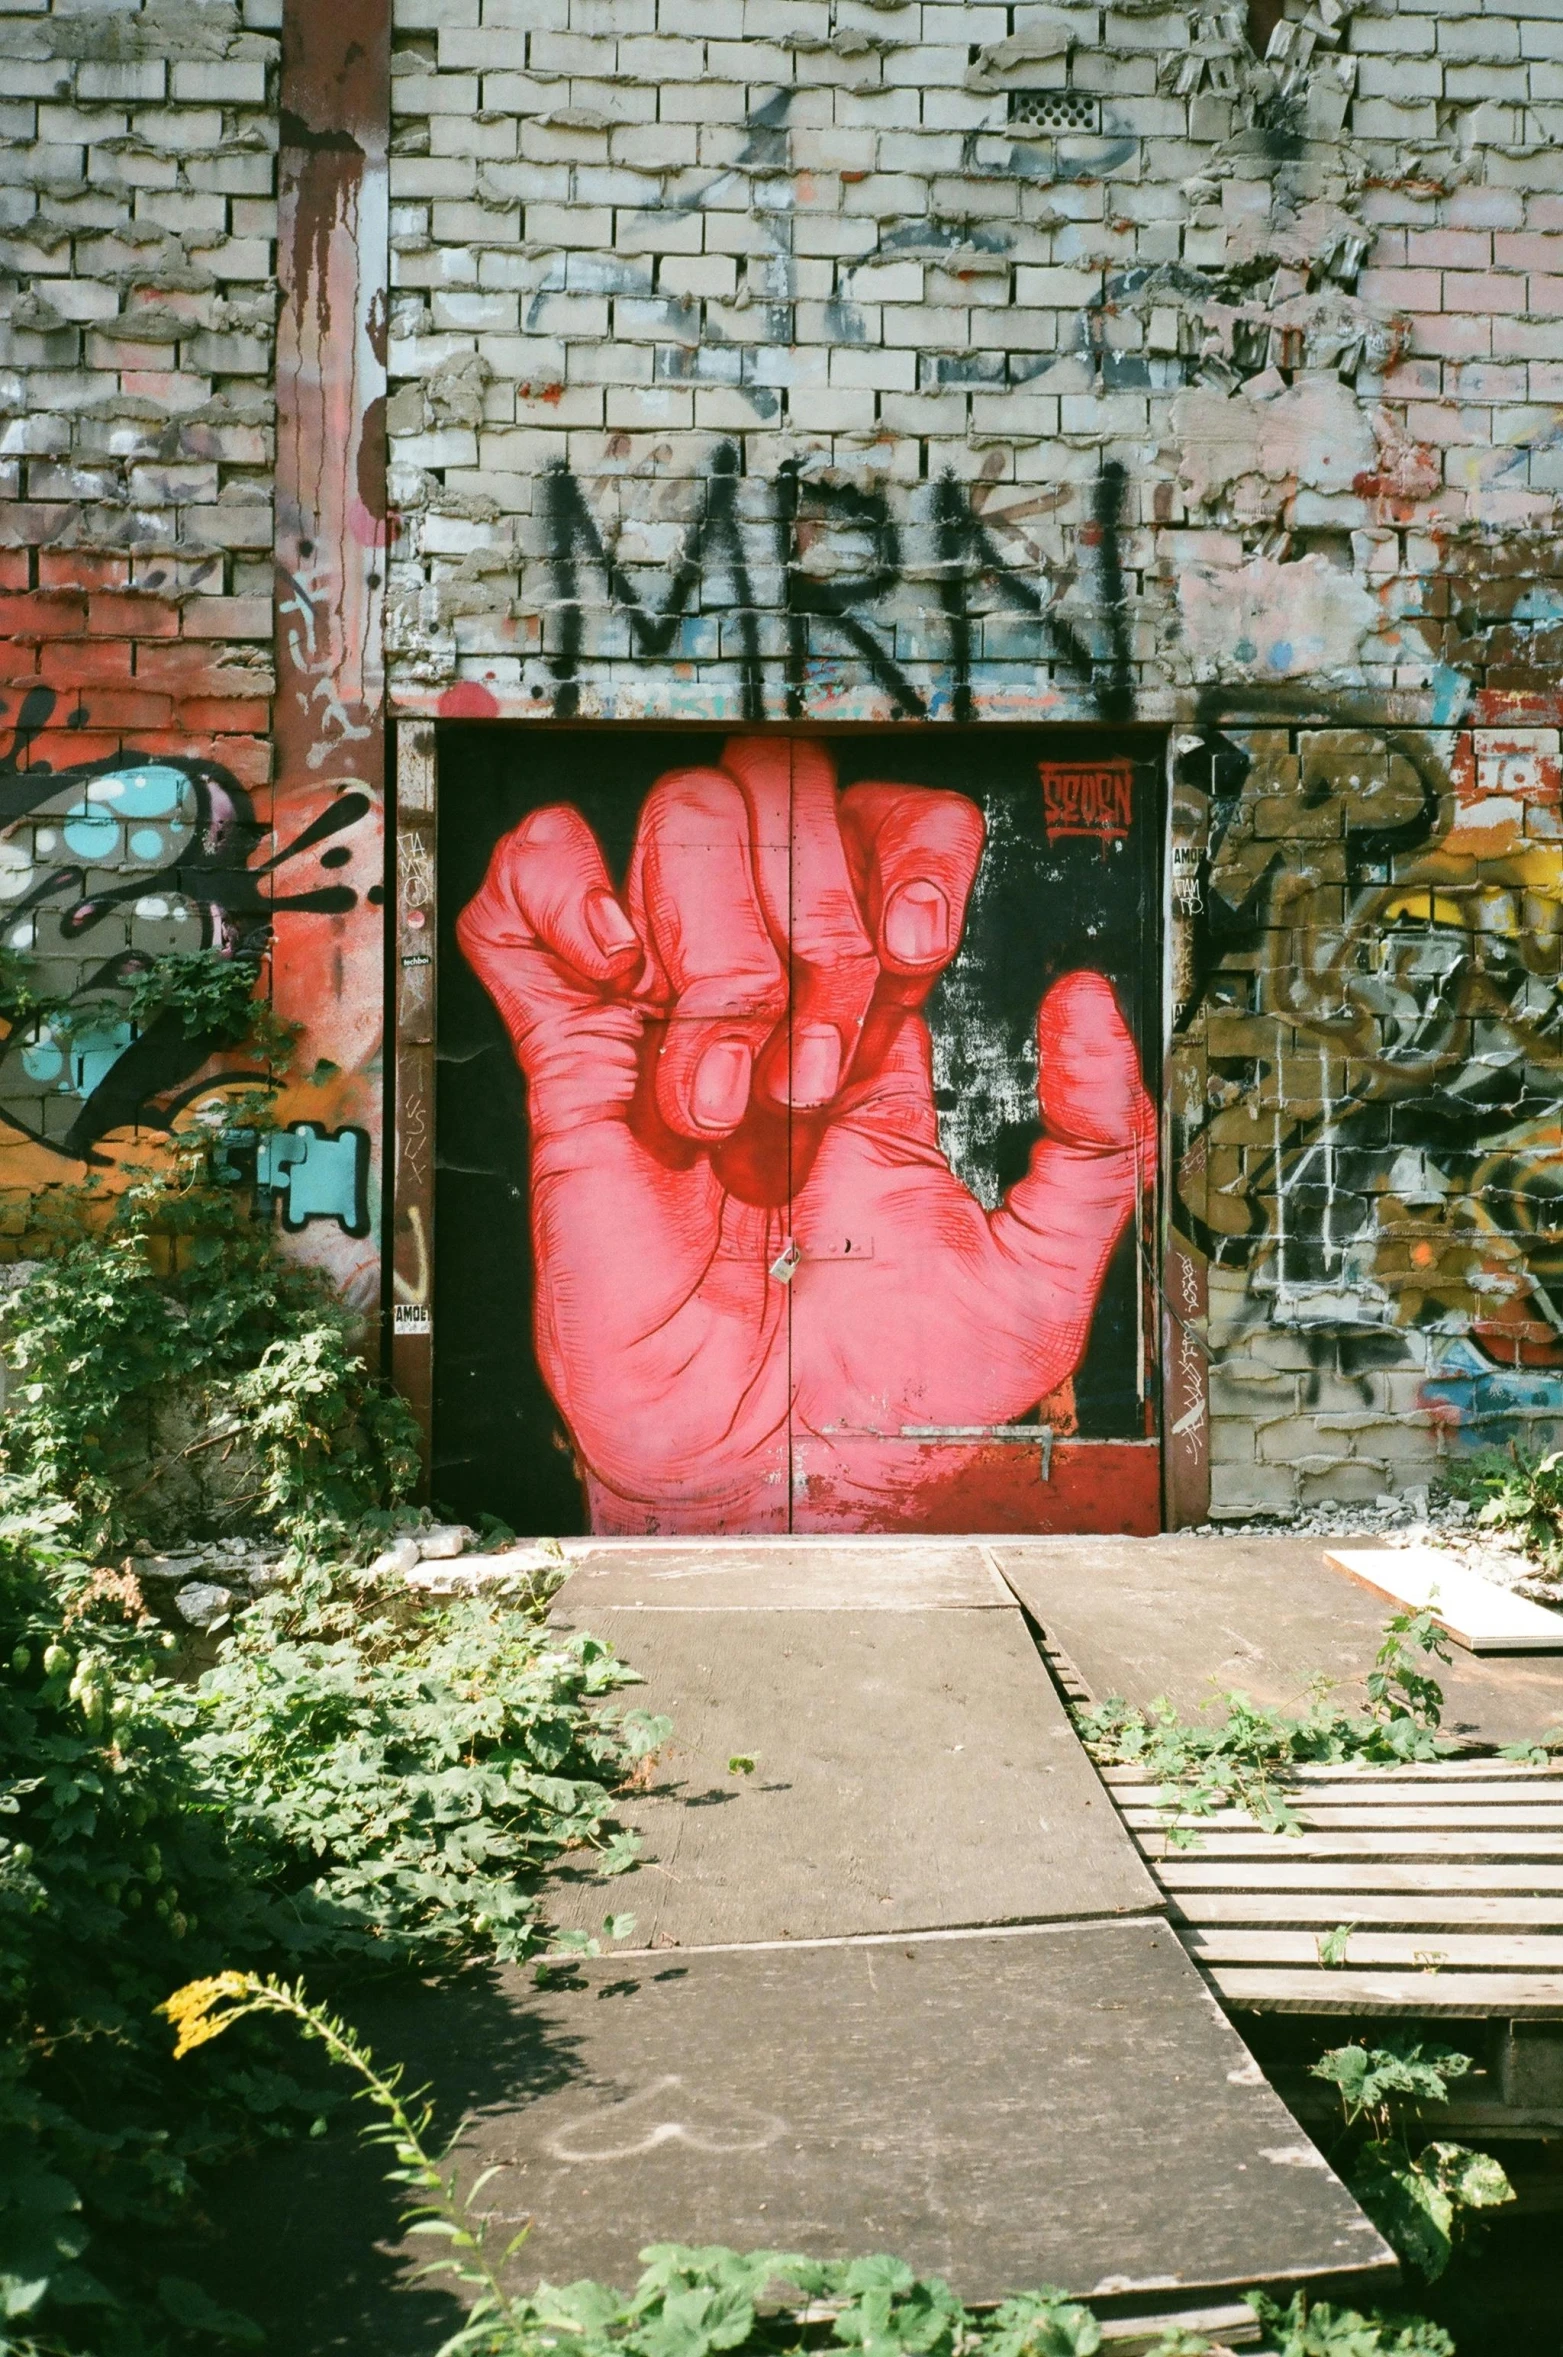 a red hand painted on the side of a building, graffiti art, by Mór Than, unsplash, street art, berlin 1 9 8 2, pink door, raised fist, beautiful surroundings